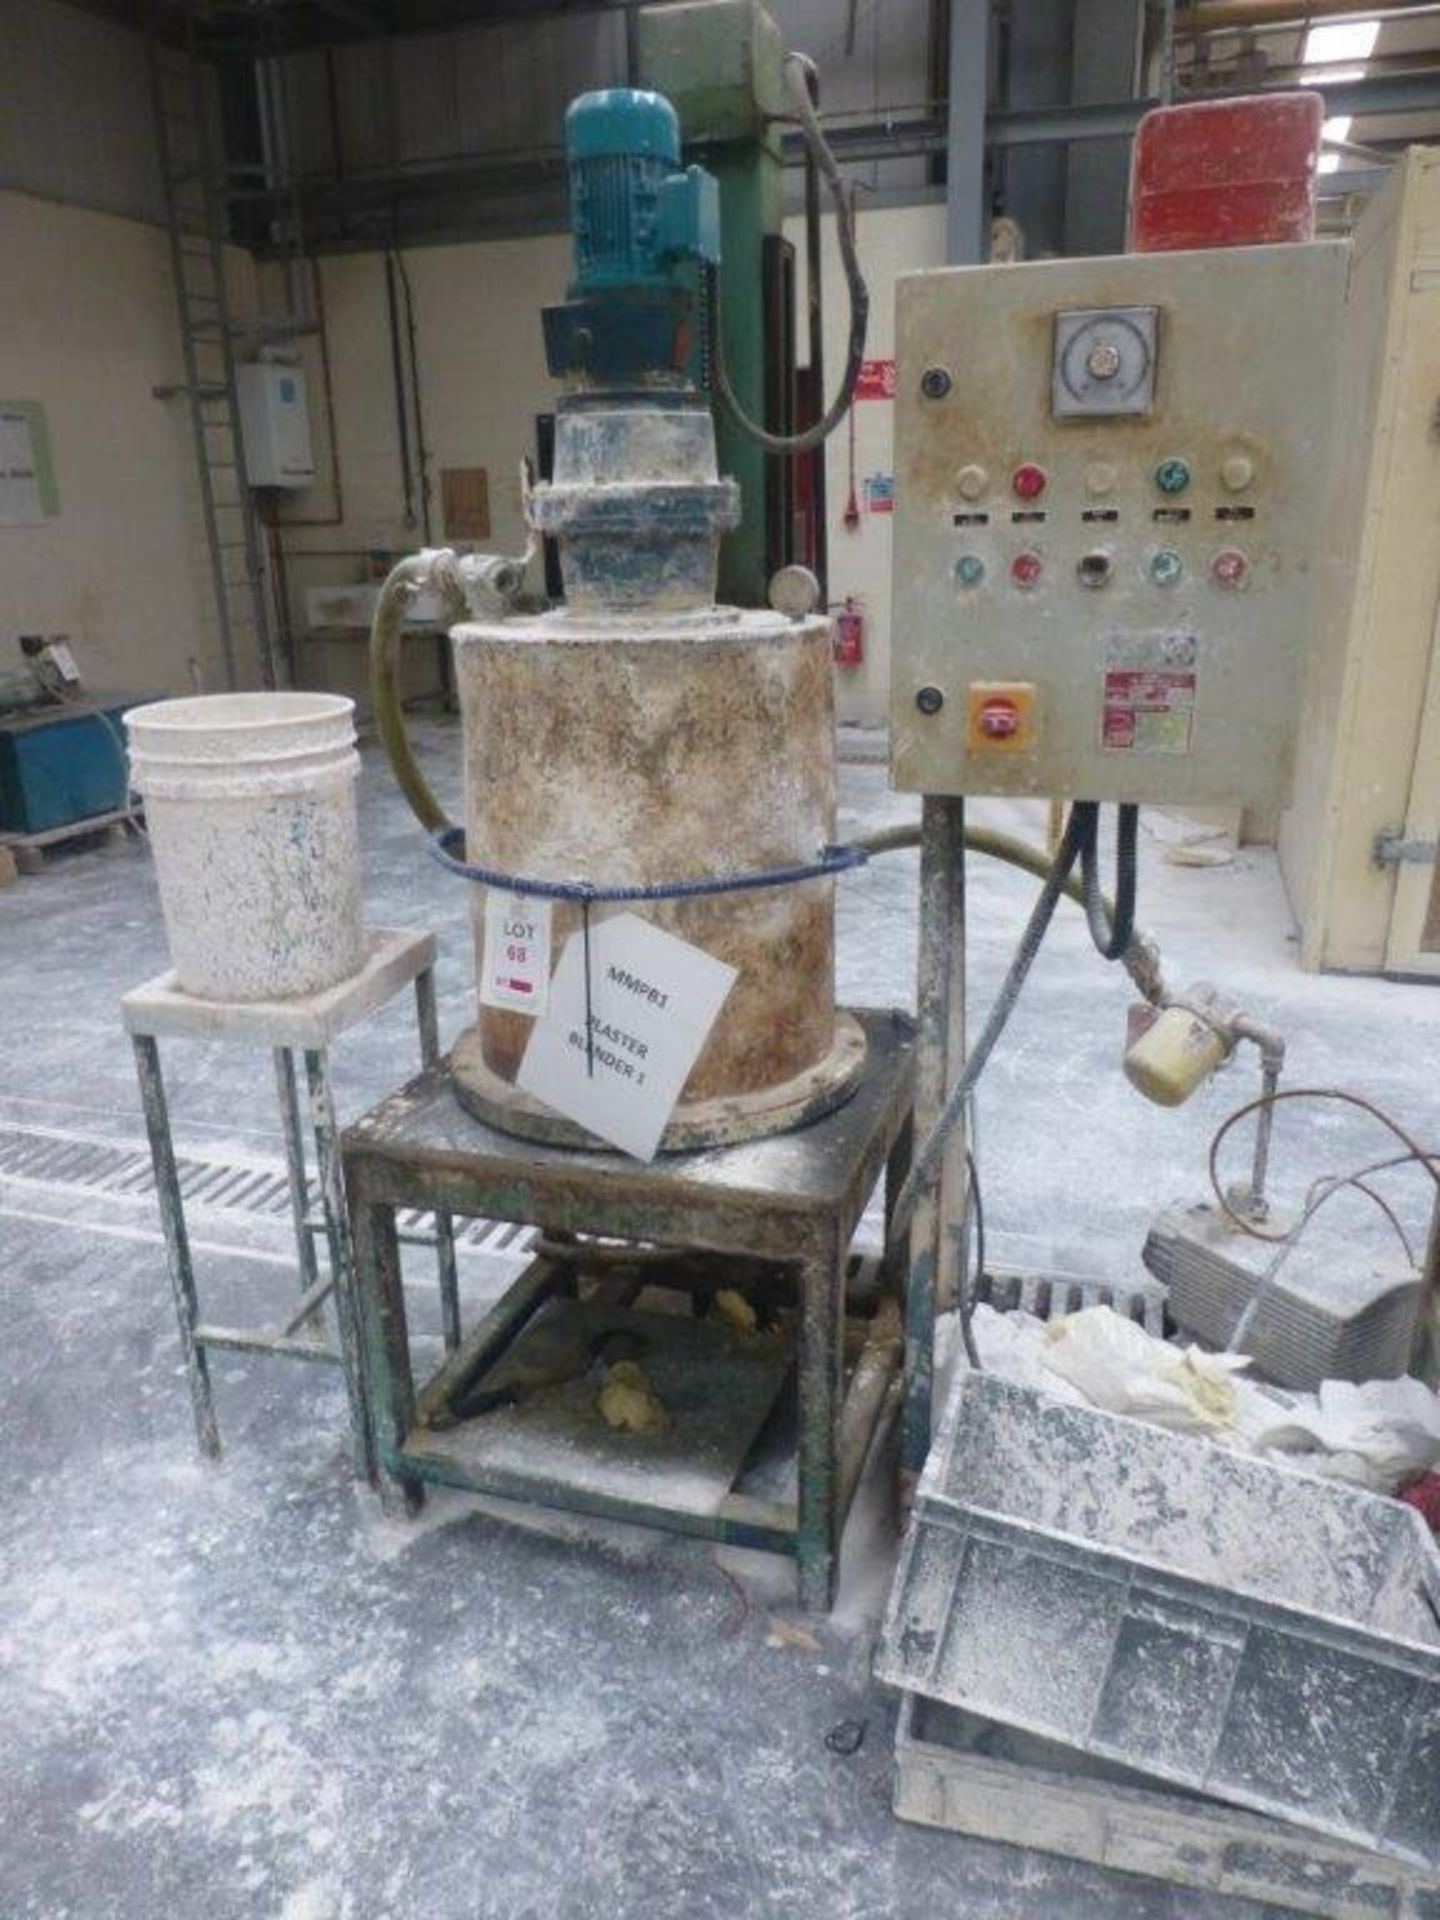 Ratcliffe rotary plaster blender, serial No 39147, Plant No MMPB1 Plaster Blender with stand and